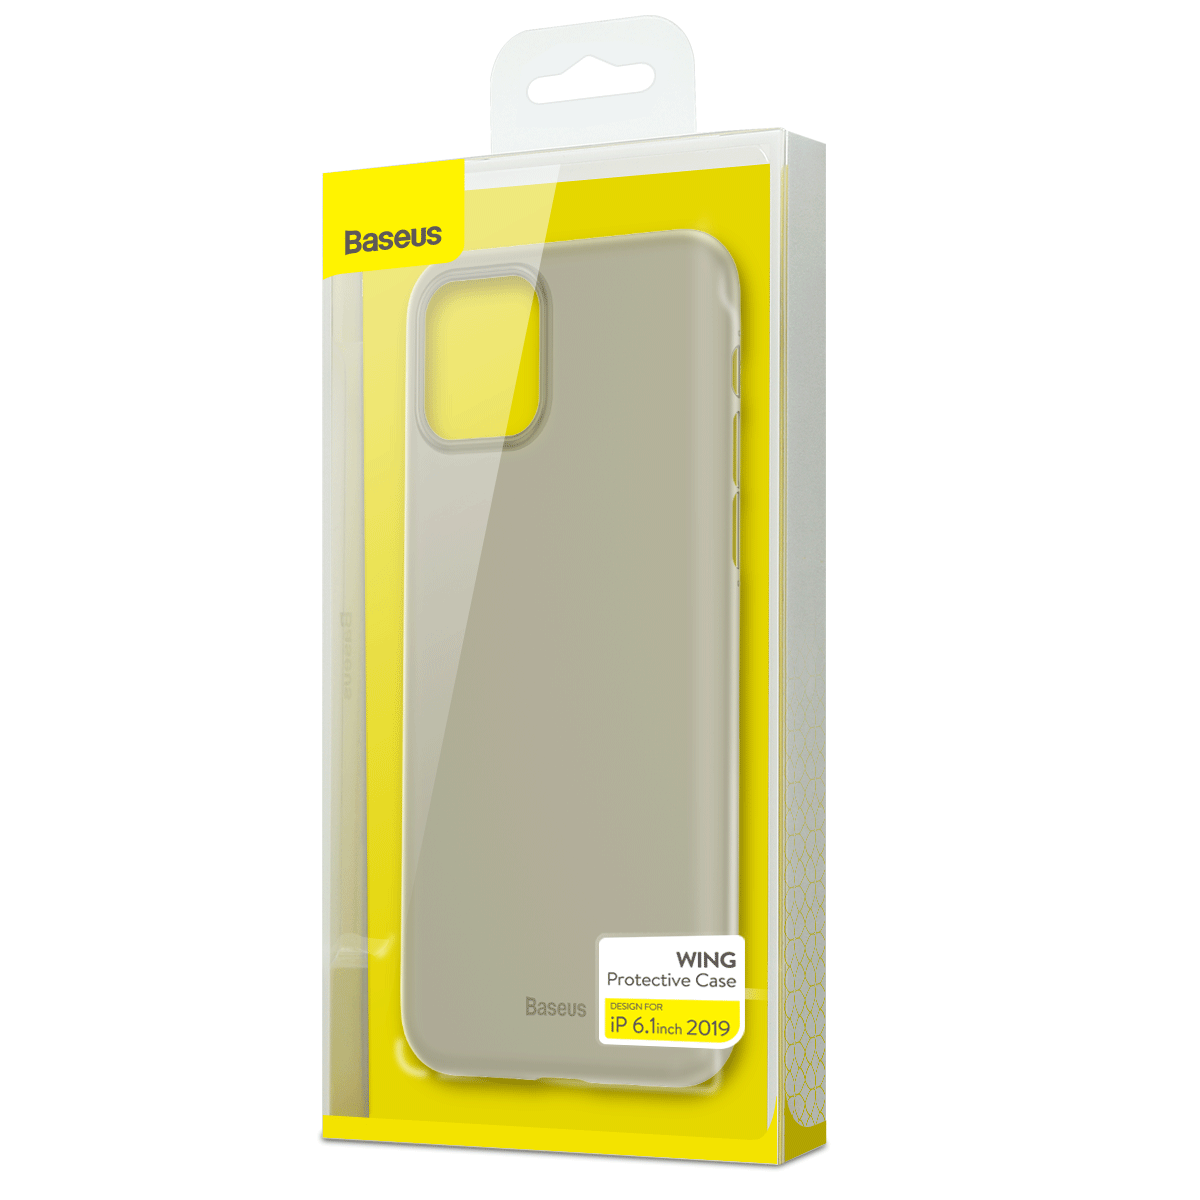 Baseus-Ultra-Thin-Anti-scratch-Matte-Translucent-PP-Protective-Case-for-iPhone-11-61-inch-1563491-11